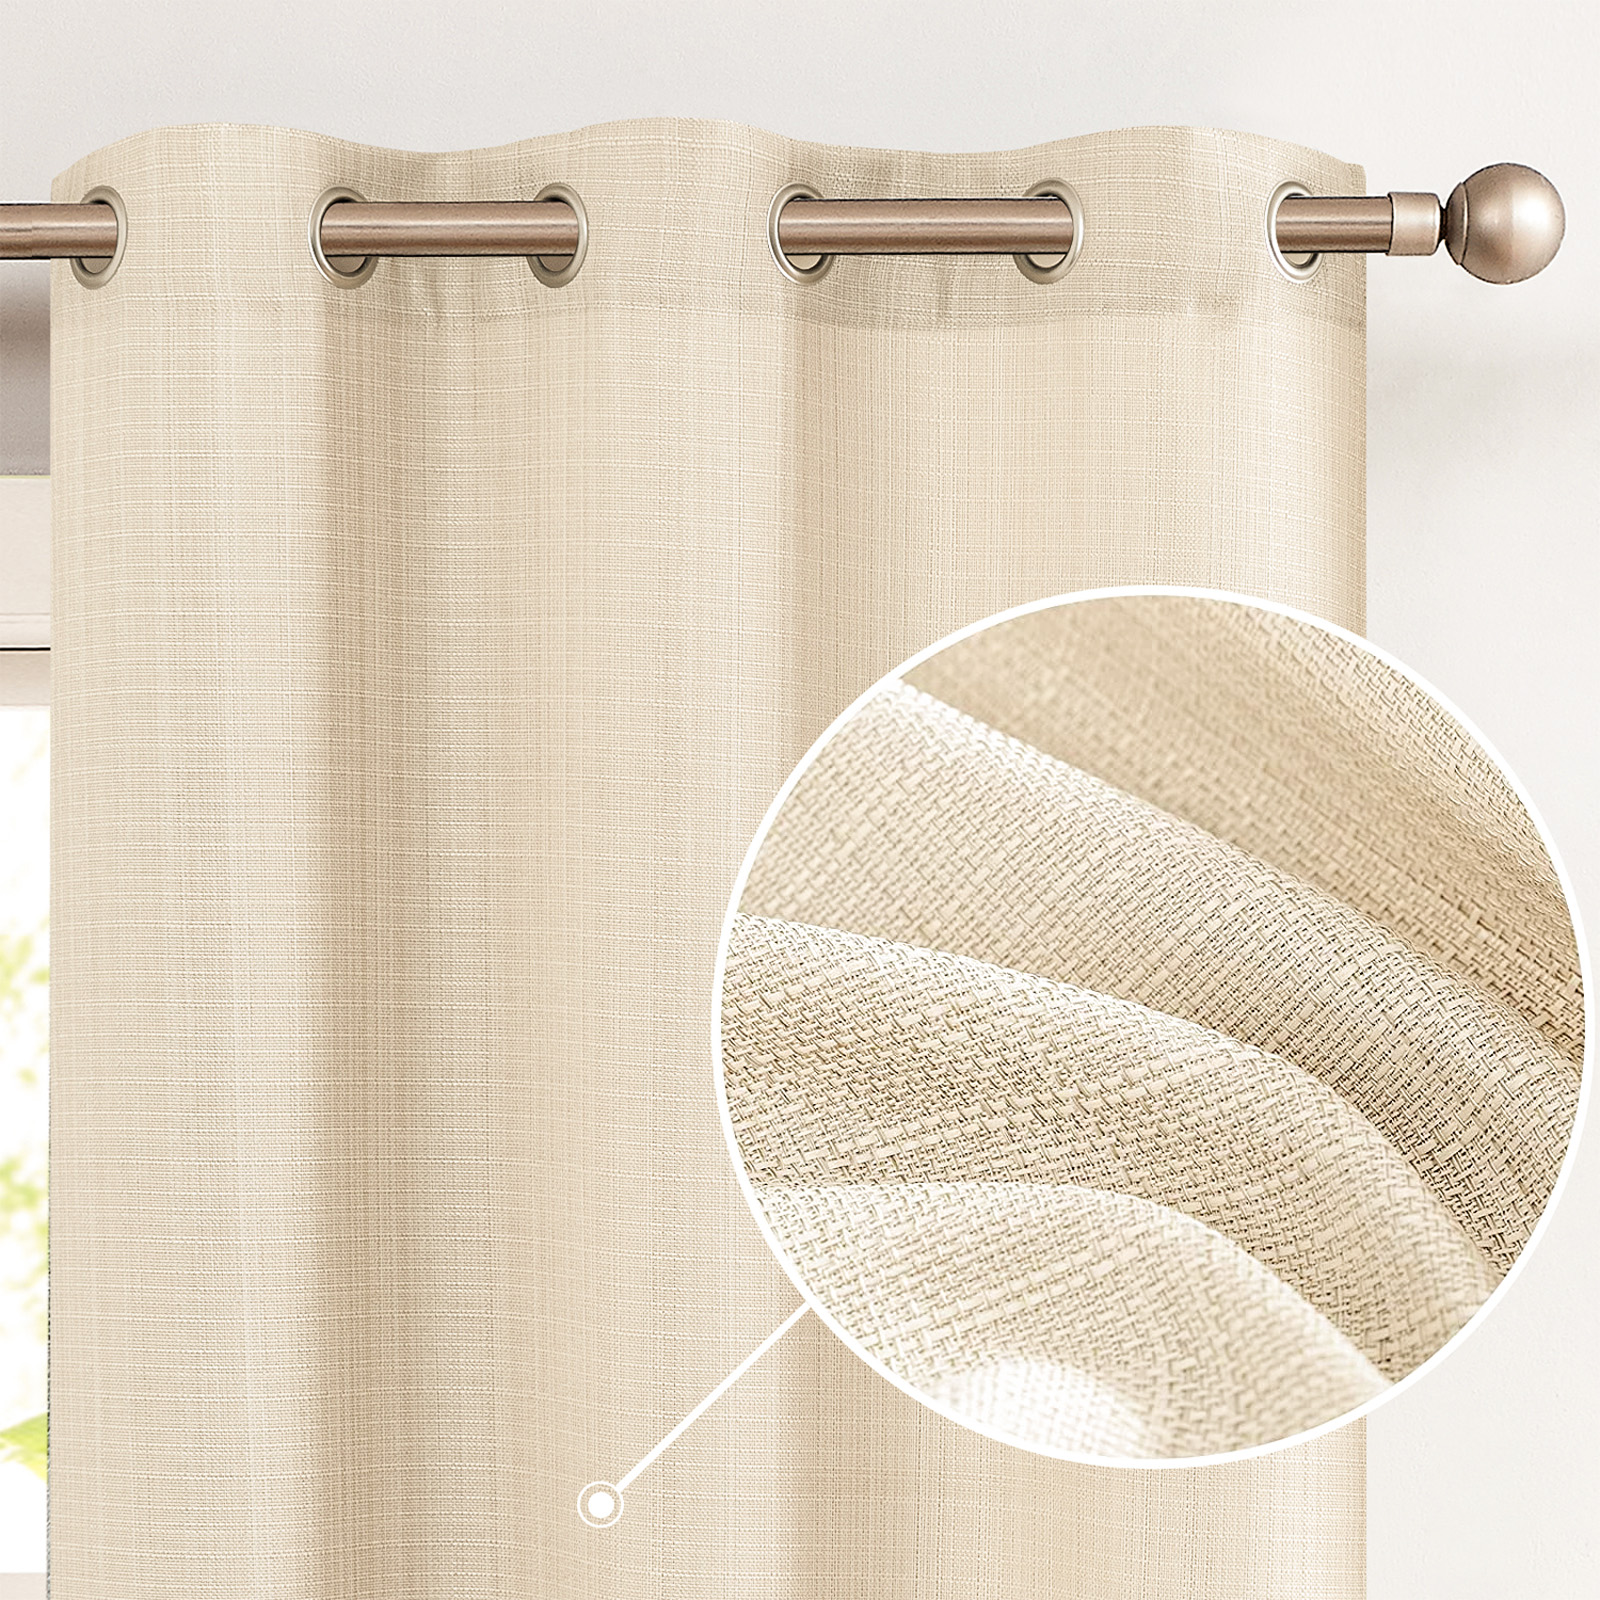 CURTAINKING Linen Textured Curtains 84 inches Beige Bedroom Living Room Window Curtain Set Light Filtering Drapes Grommet Top 2 Panels - image 1 of 8